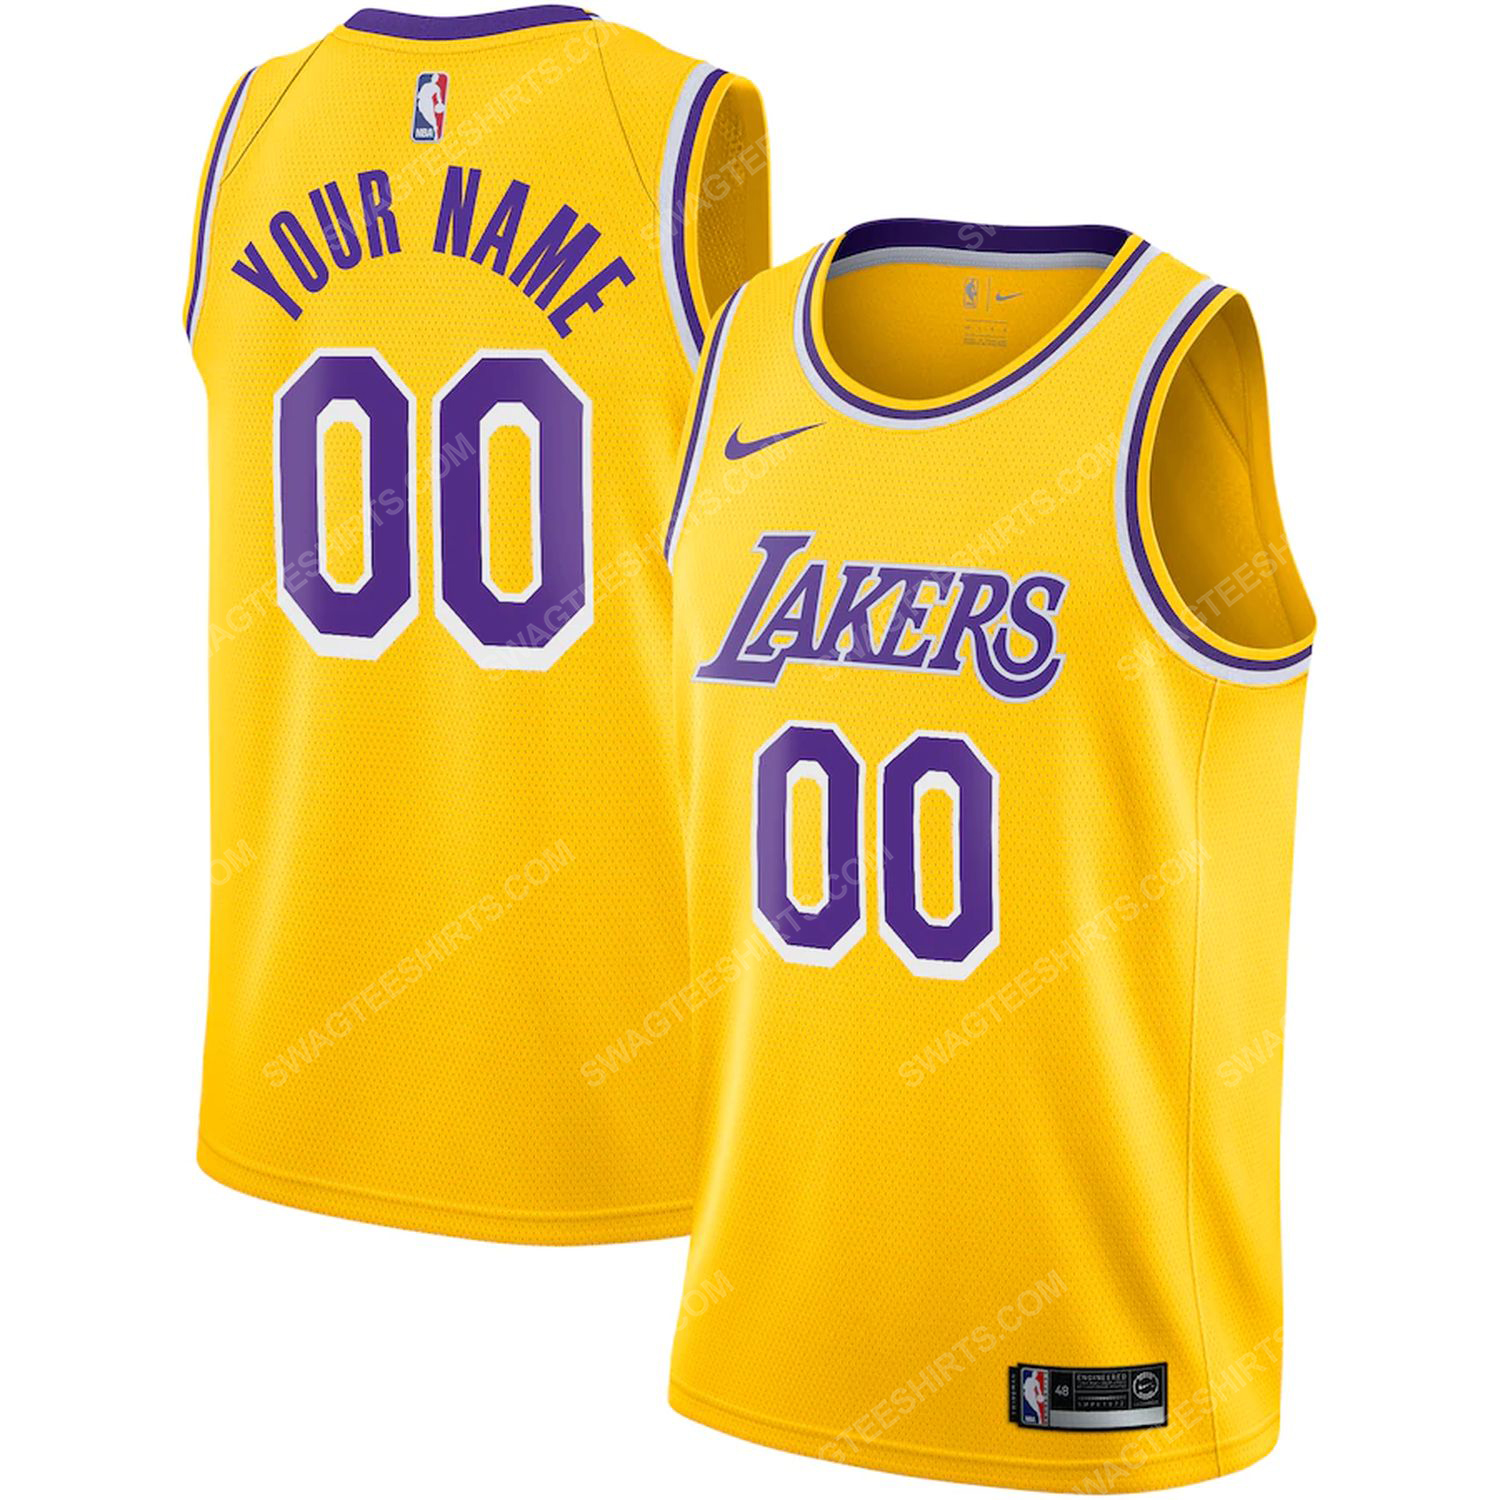 Custom nba los angeles lakers basketball jersey-icon edition- gold - Copy